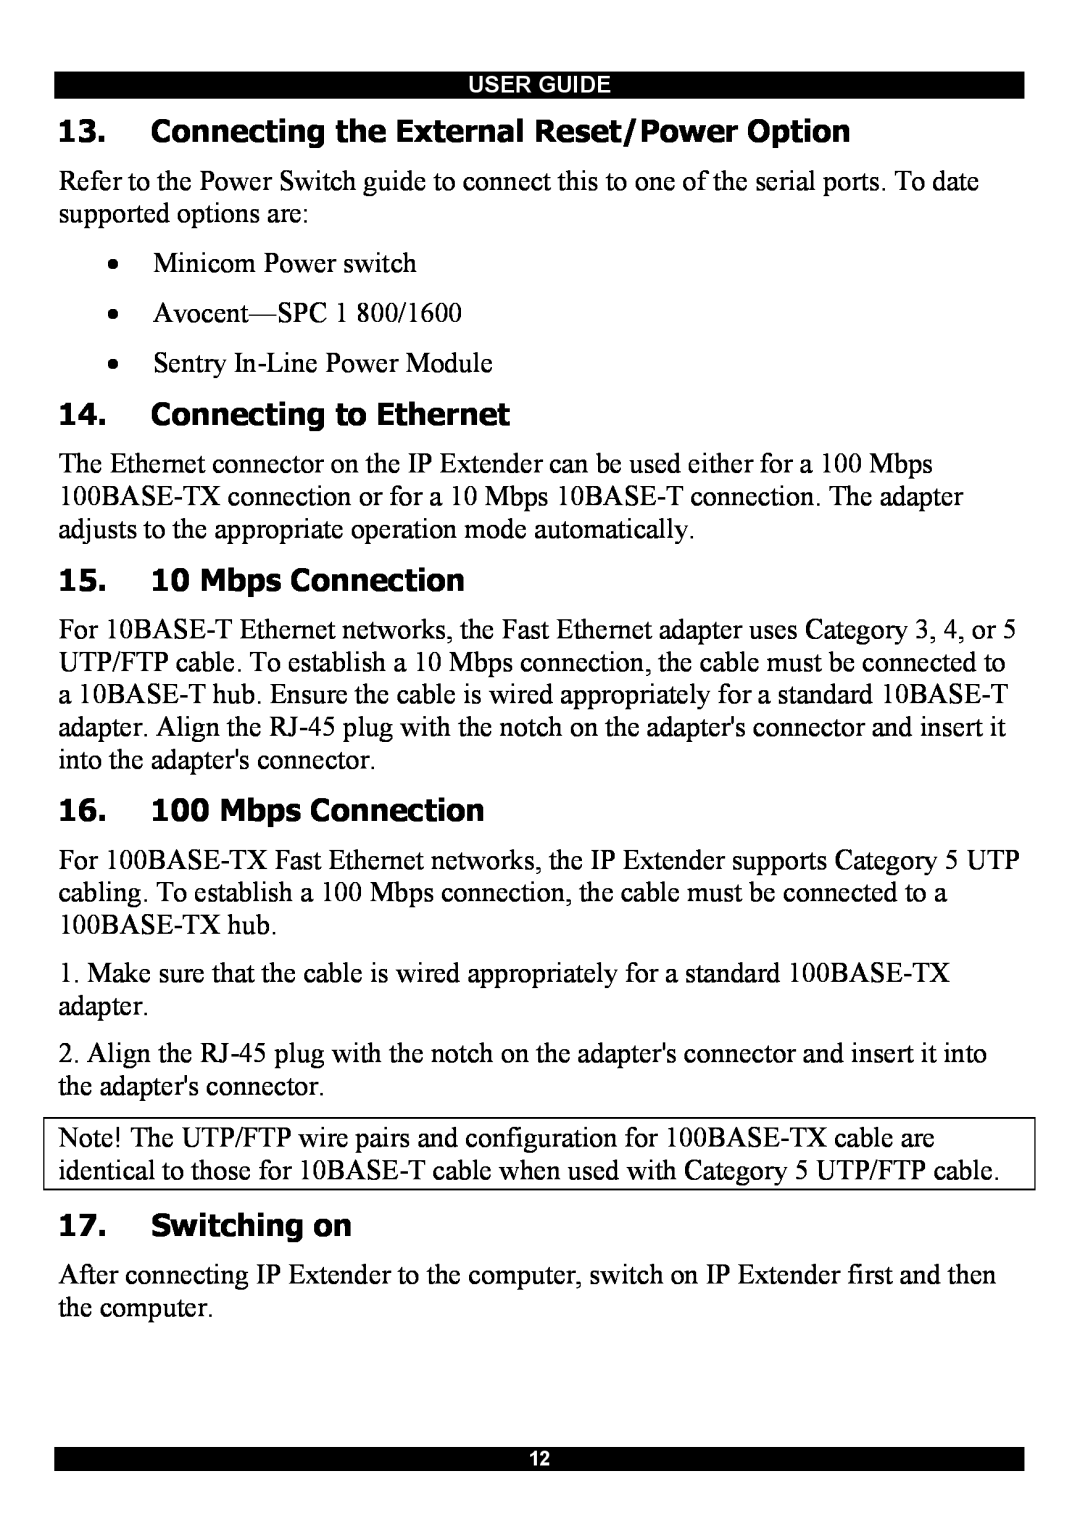 Minicom Advanced Systems Smart IP Extender manual Connecting the External Reset/Power Option, Connecting to Ethernet 